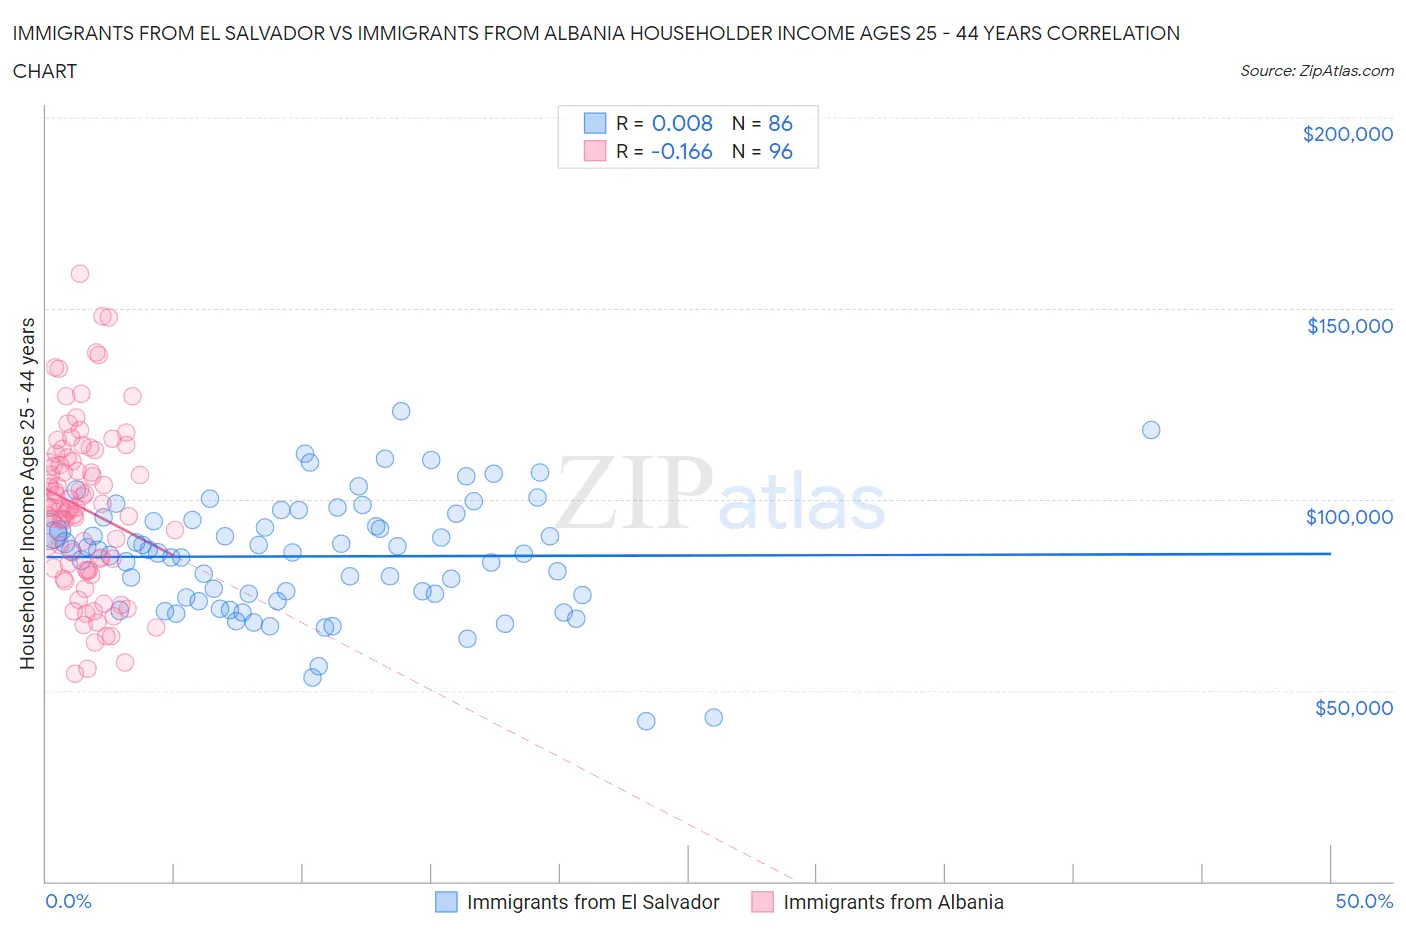 Immigrants from El Salvador vs Immigrants from Albania Householder Income Ages 25 - 44 years